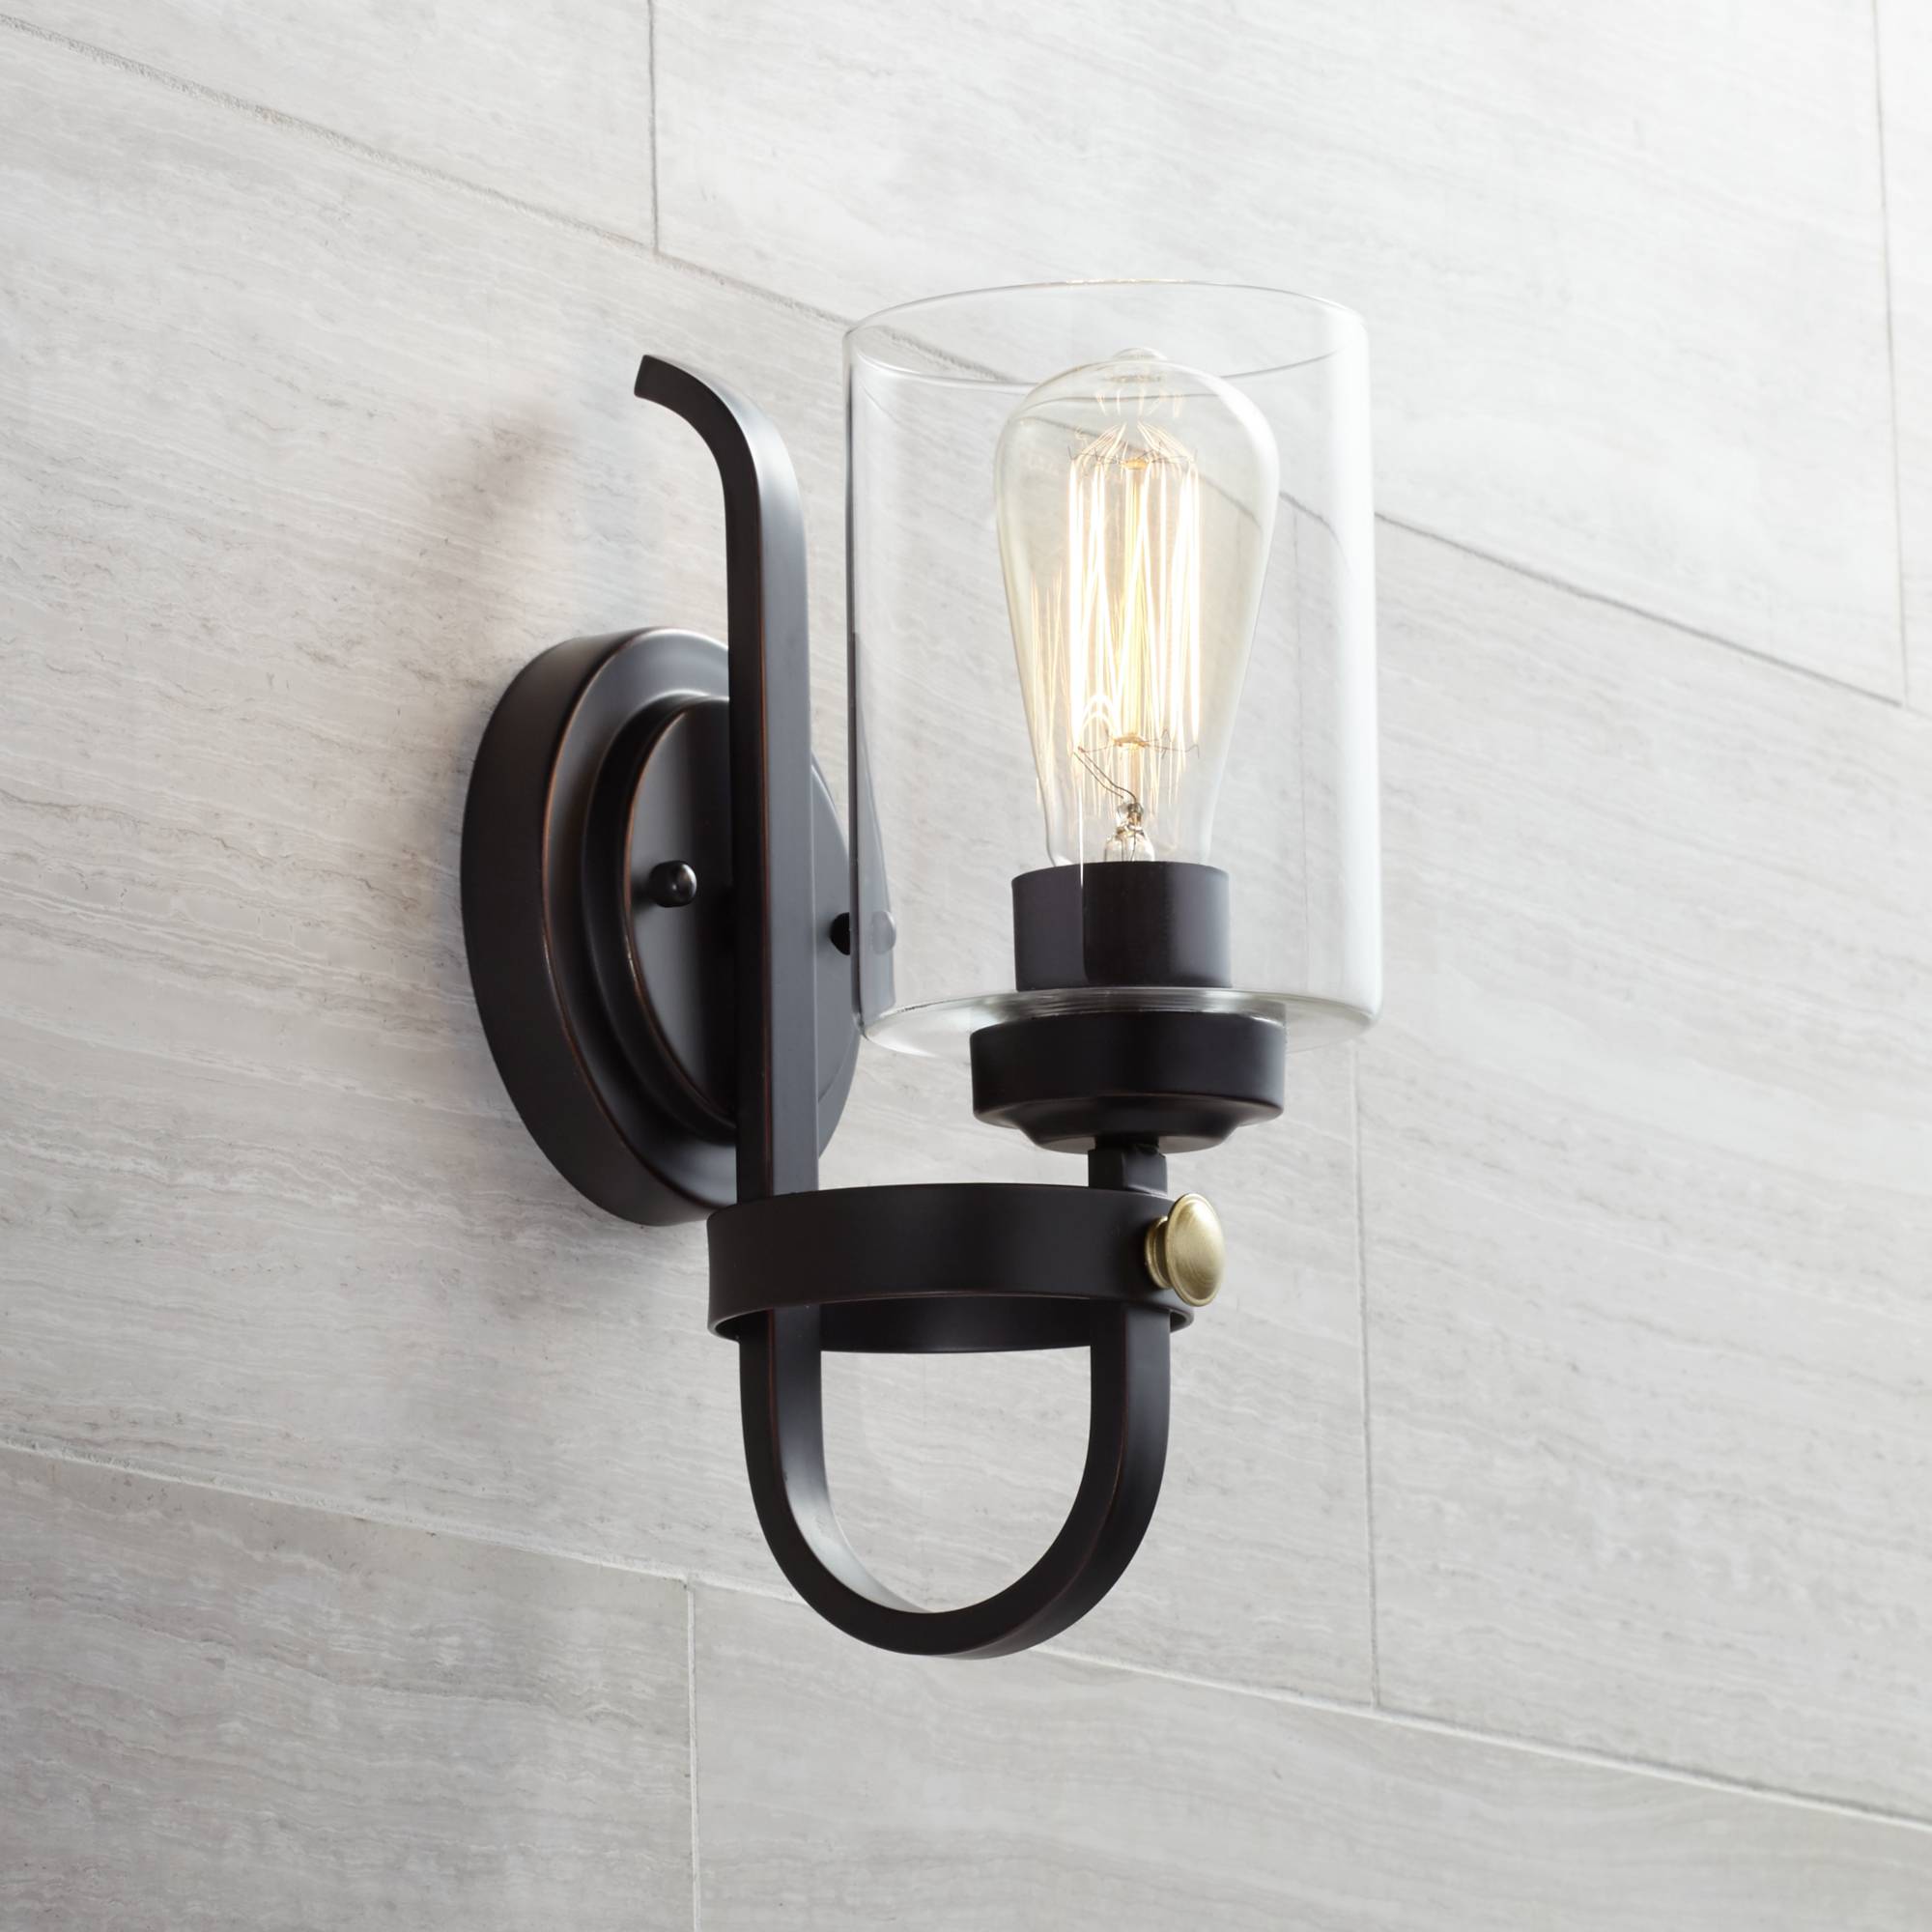 Details About Rustic Farmhouse Wall Light Sconce Led Bronze 12 Fixture For Bedroom Hallway